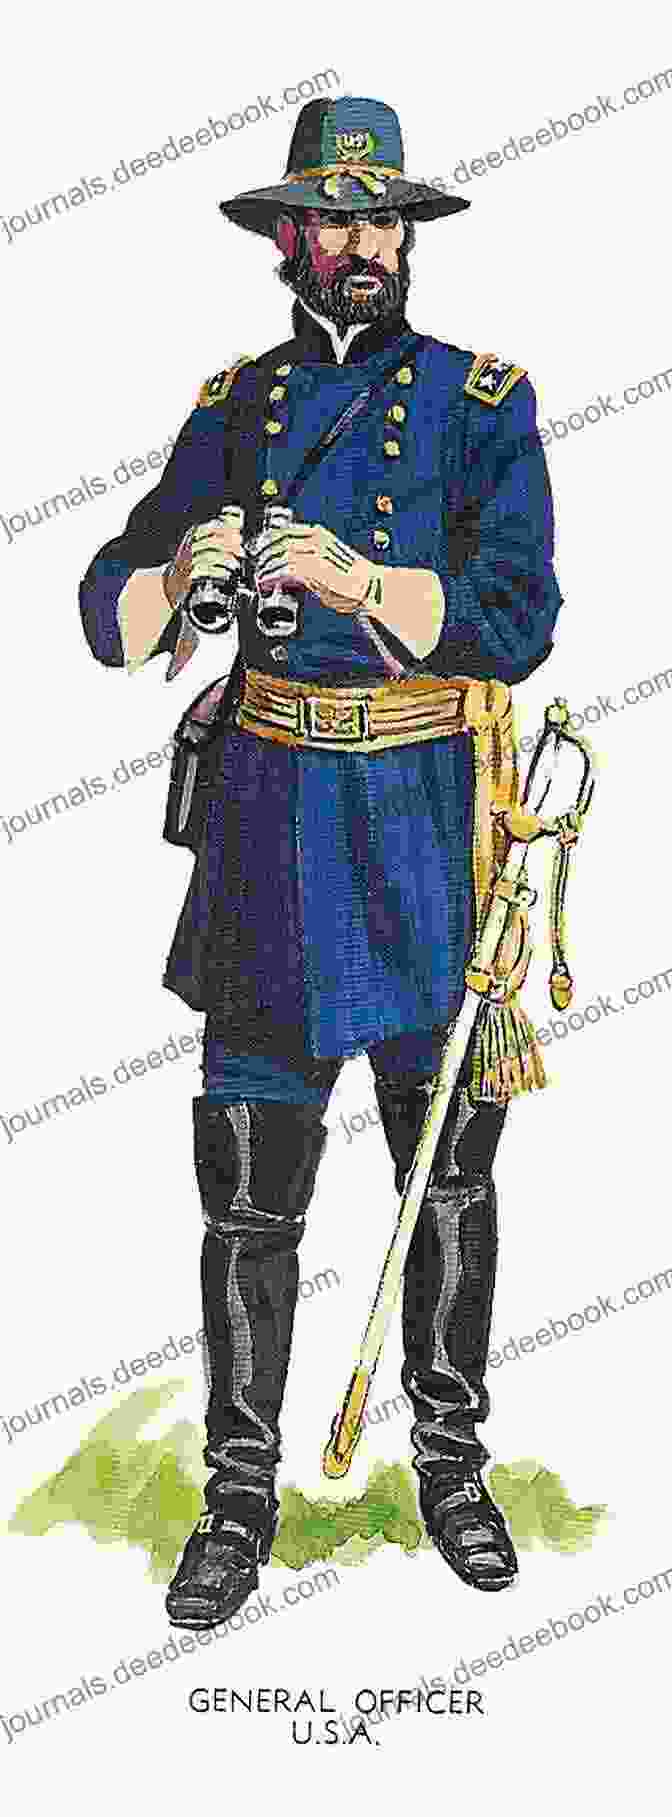 Janvier Tisi In The Uniform Of The Union Troops The Union Moujik Janvier Tisi